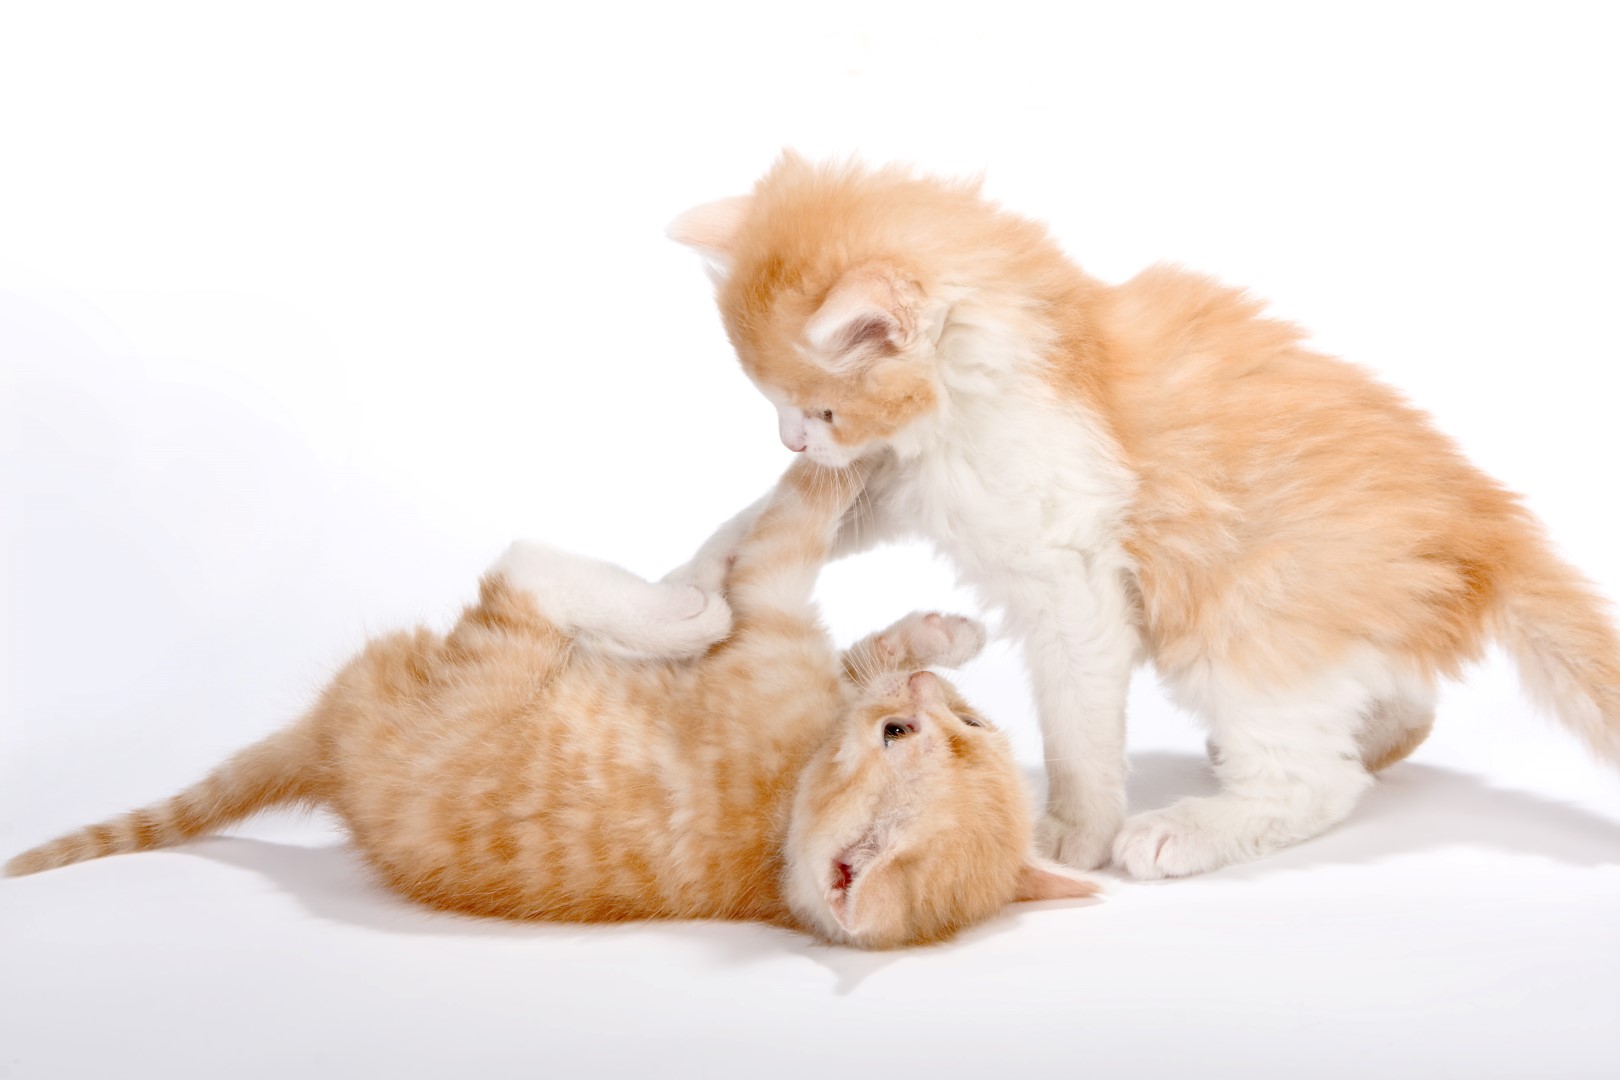 28 Top Images Cats Playing Or Fighting Video Two Cats Playing On The Ground Free Image